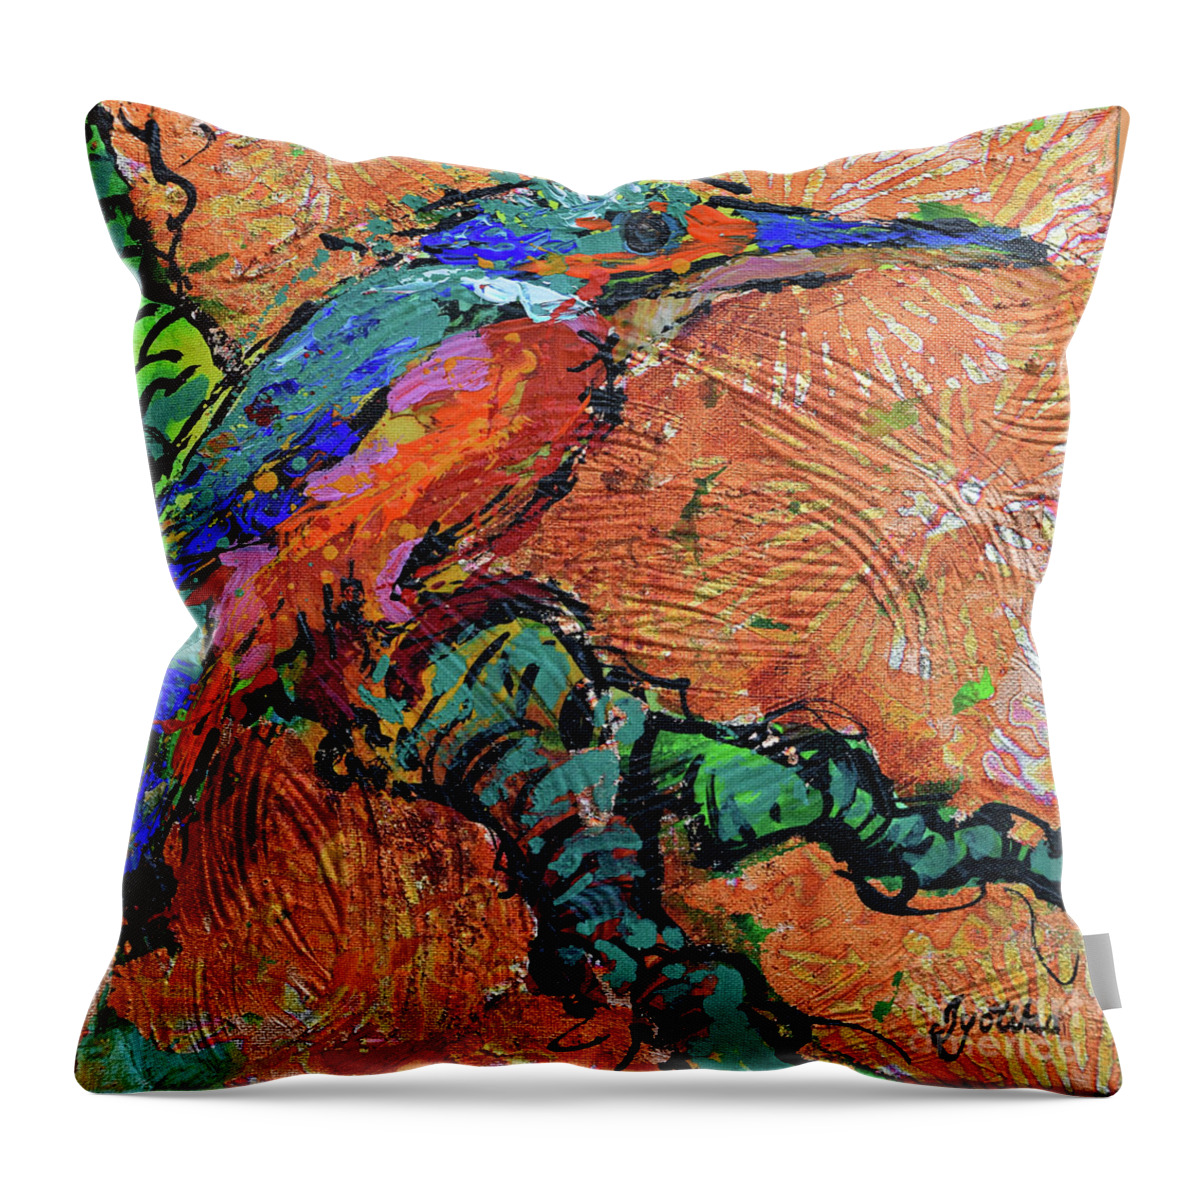  Throw Pillow featuring the painting Kingfisher_2 by Jyotika Shroff